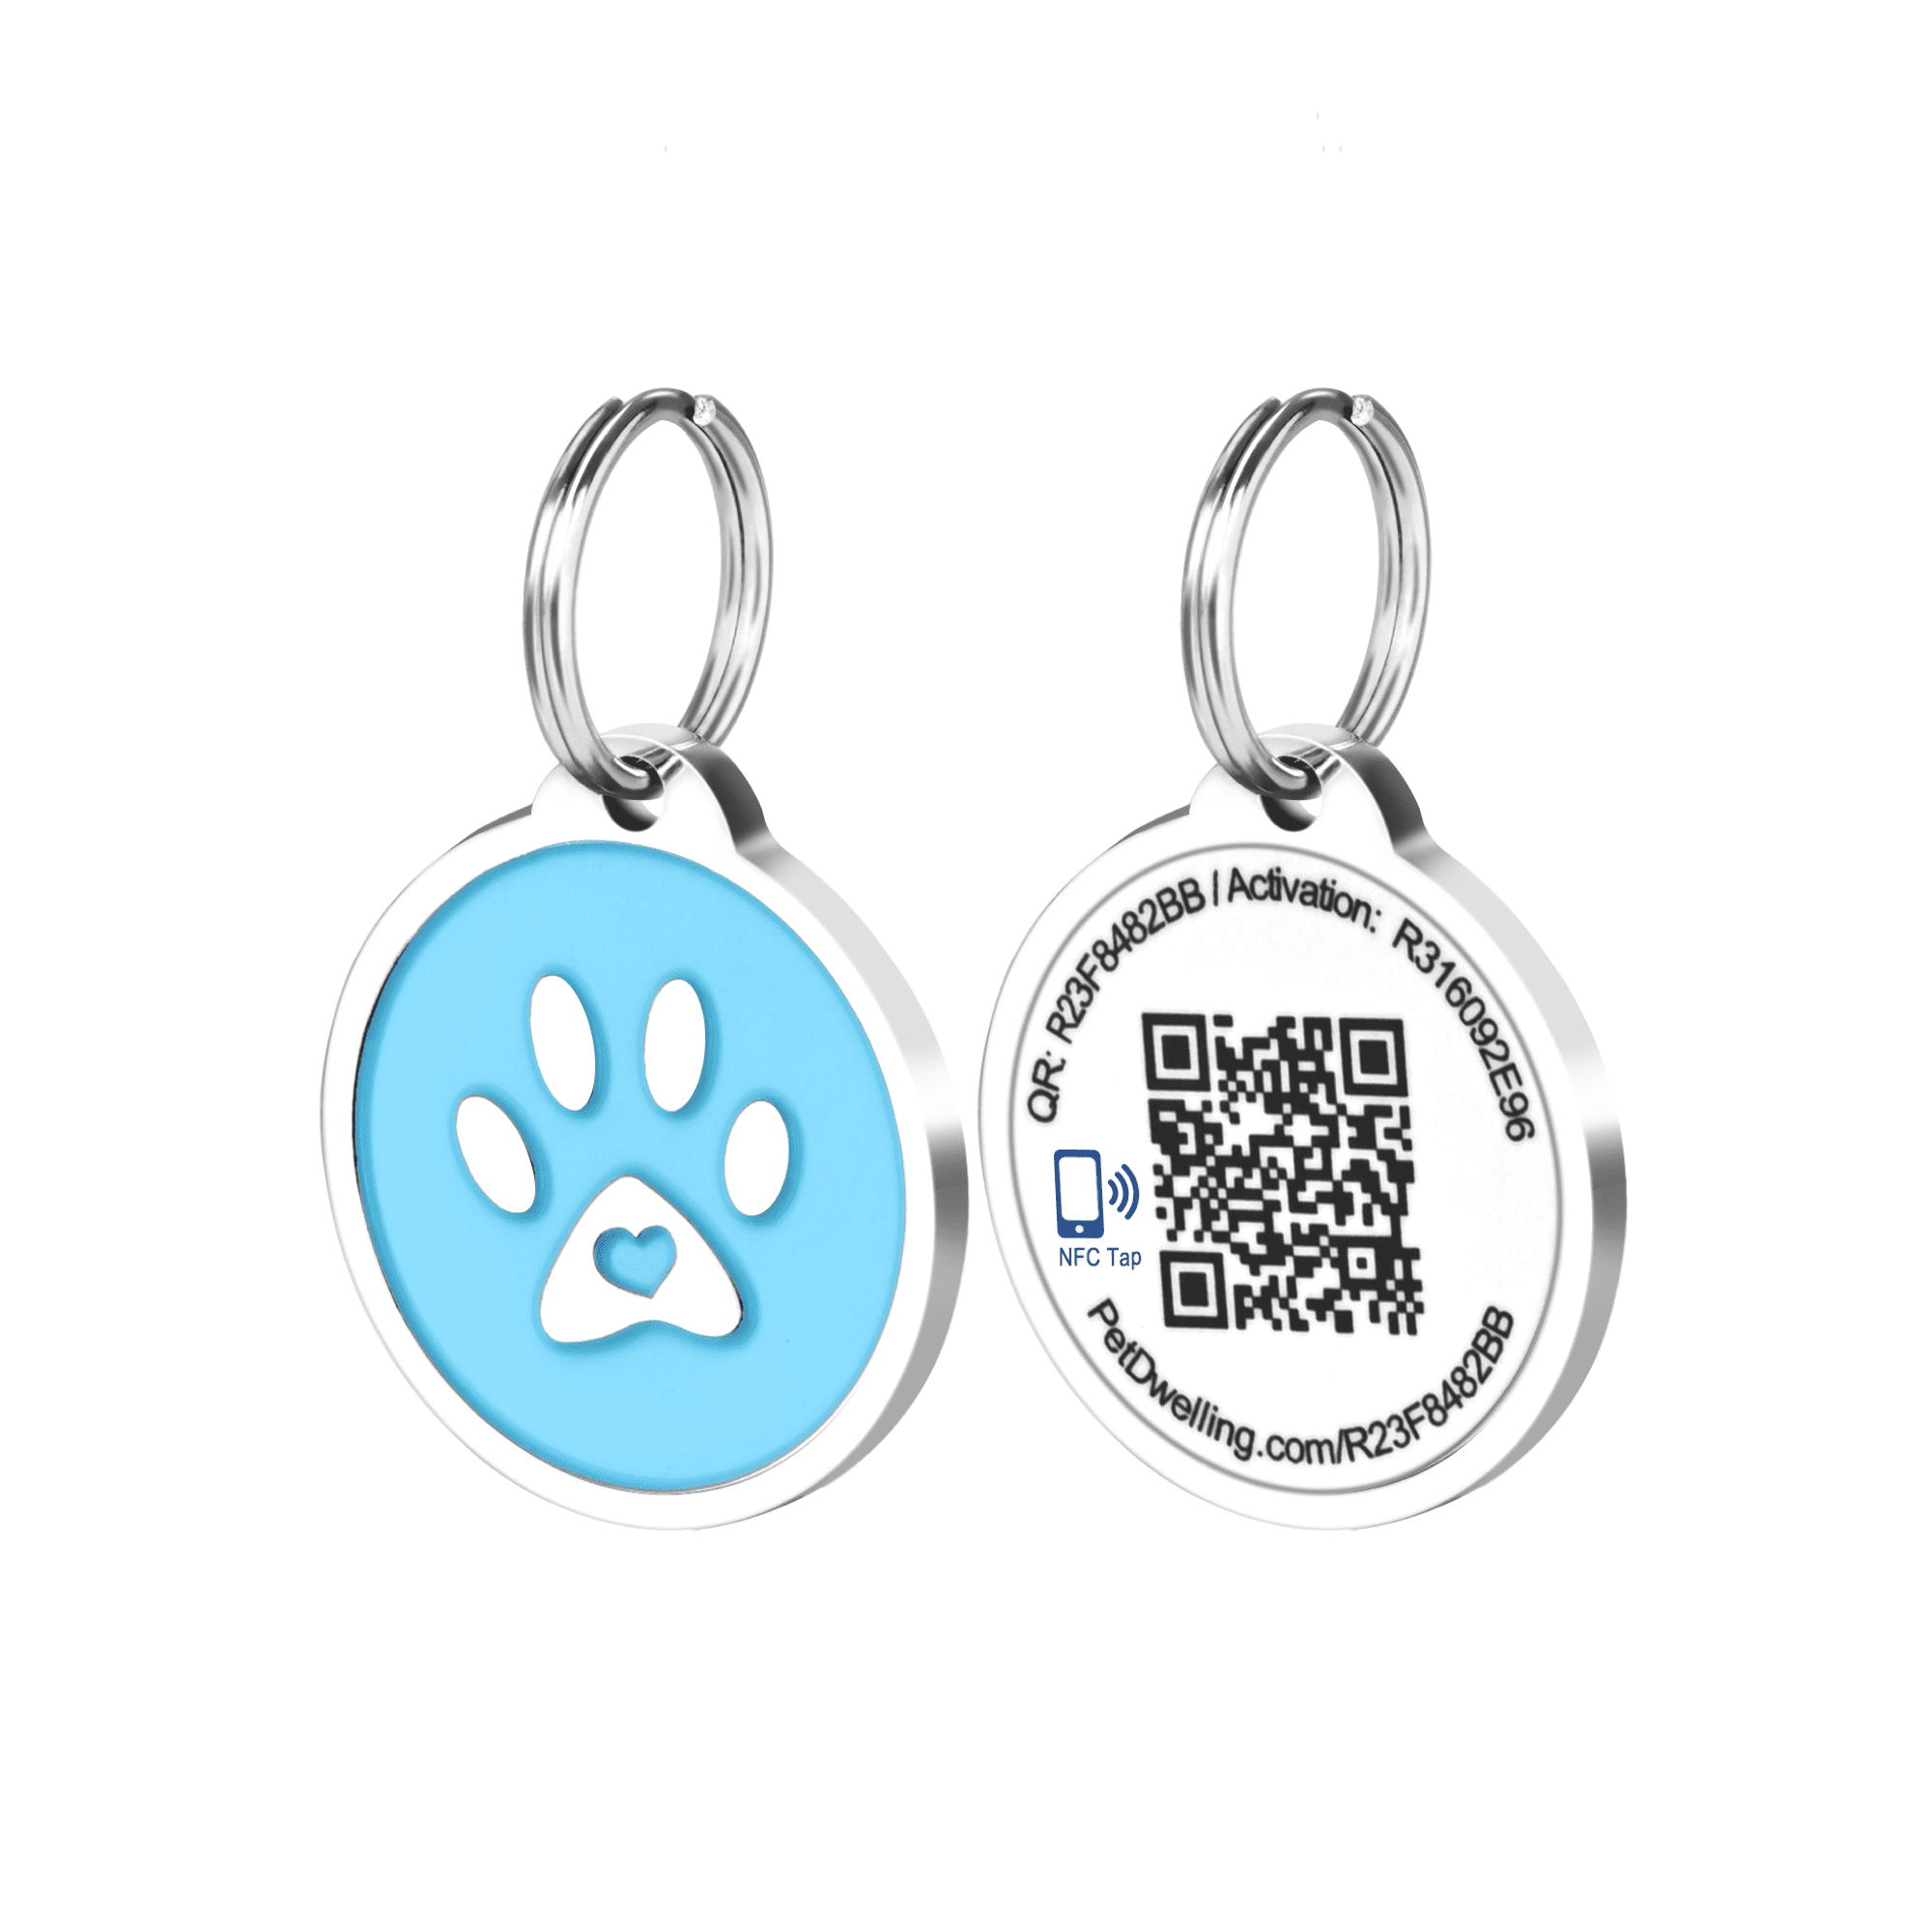  QR Dog Tags for dogs and Cats - Small Dog Tag & Cat Tag - GPS  Pet Id Tag - Scannable QR Pet Tags for Location - Cat Id Tag